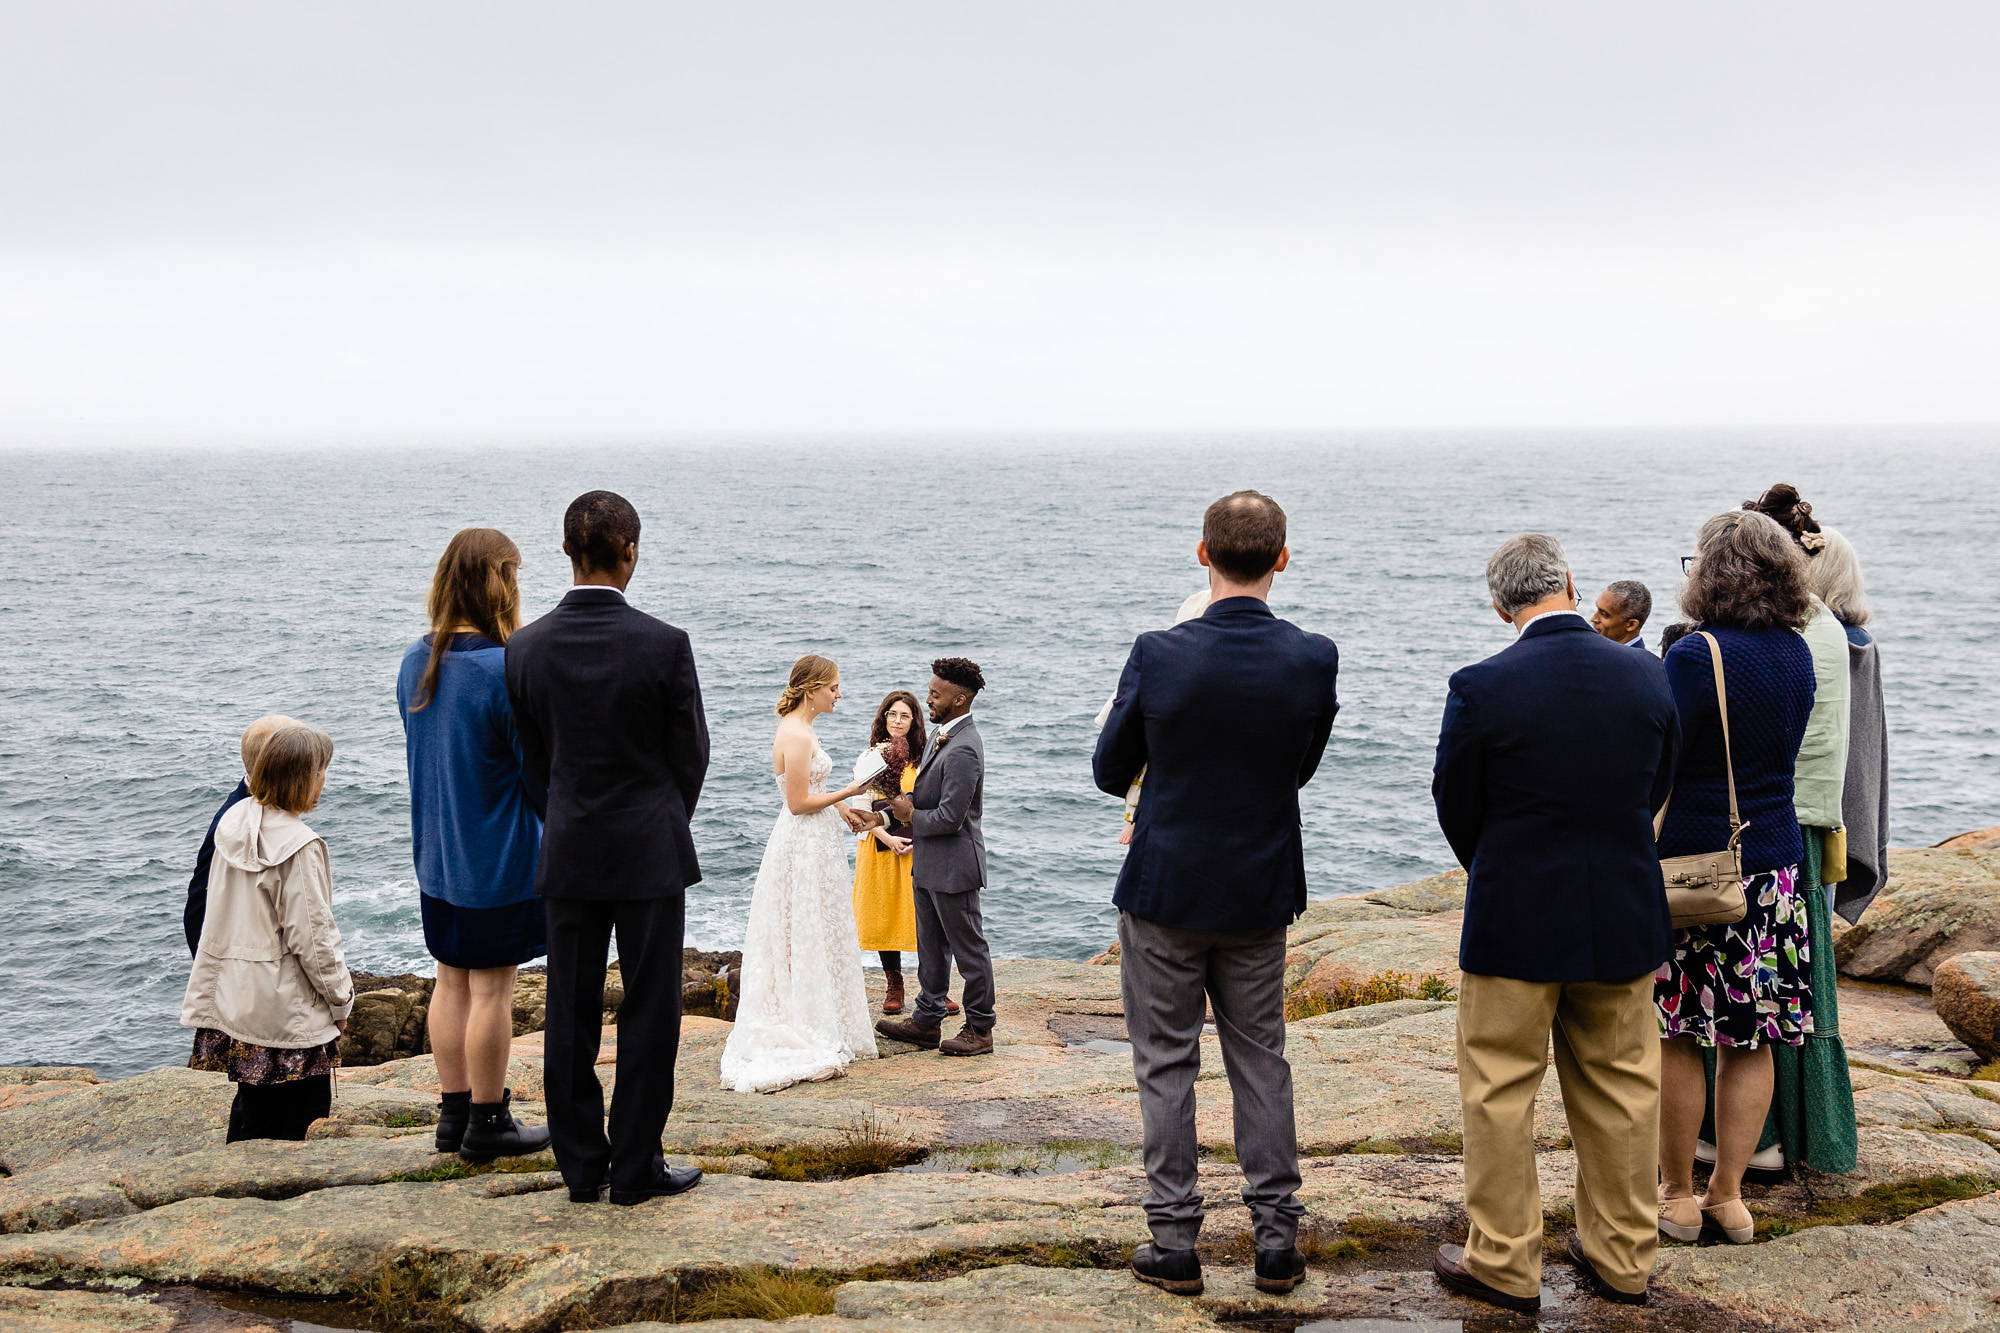 A wedding elopement in Acadia National Park